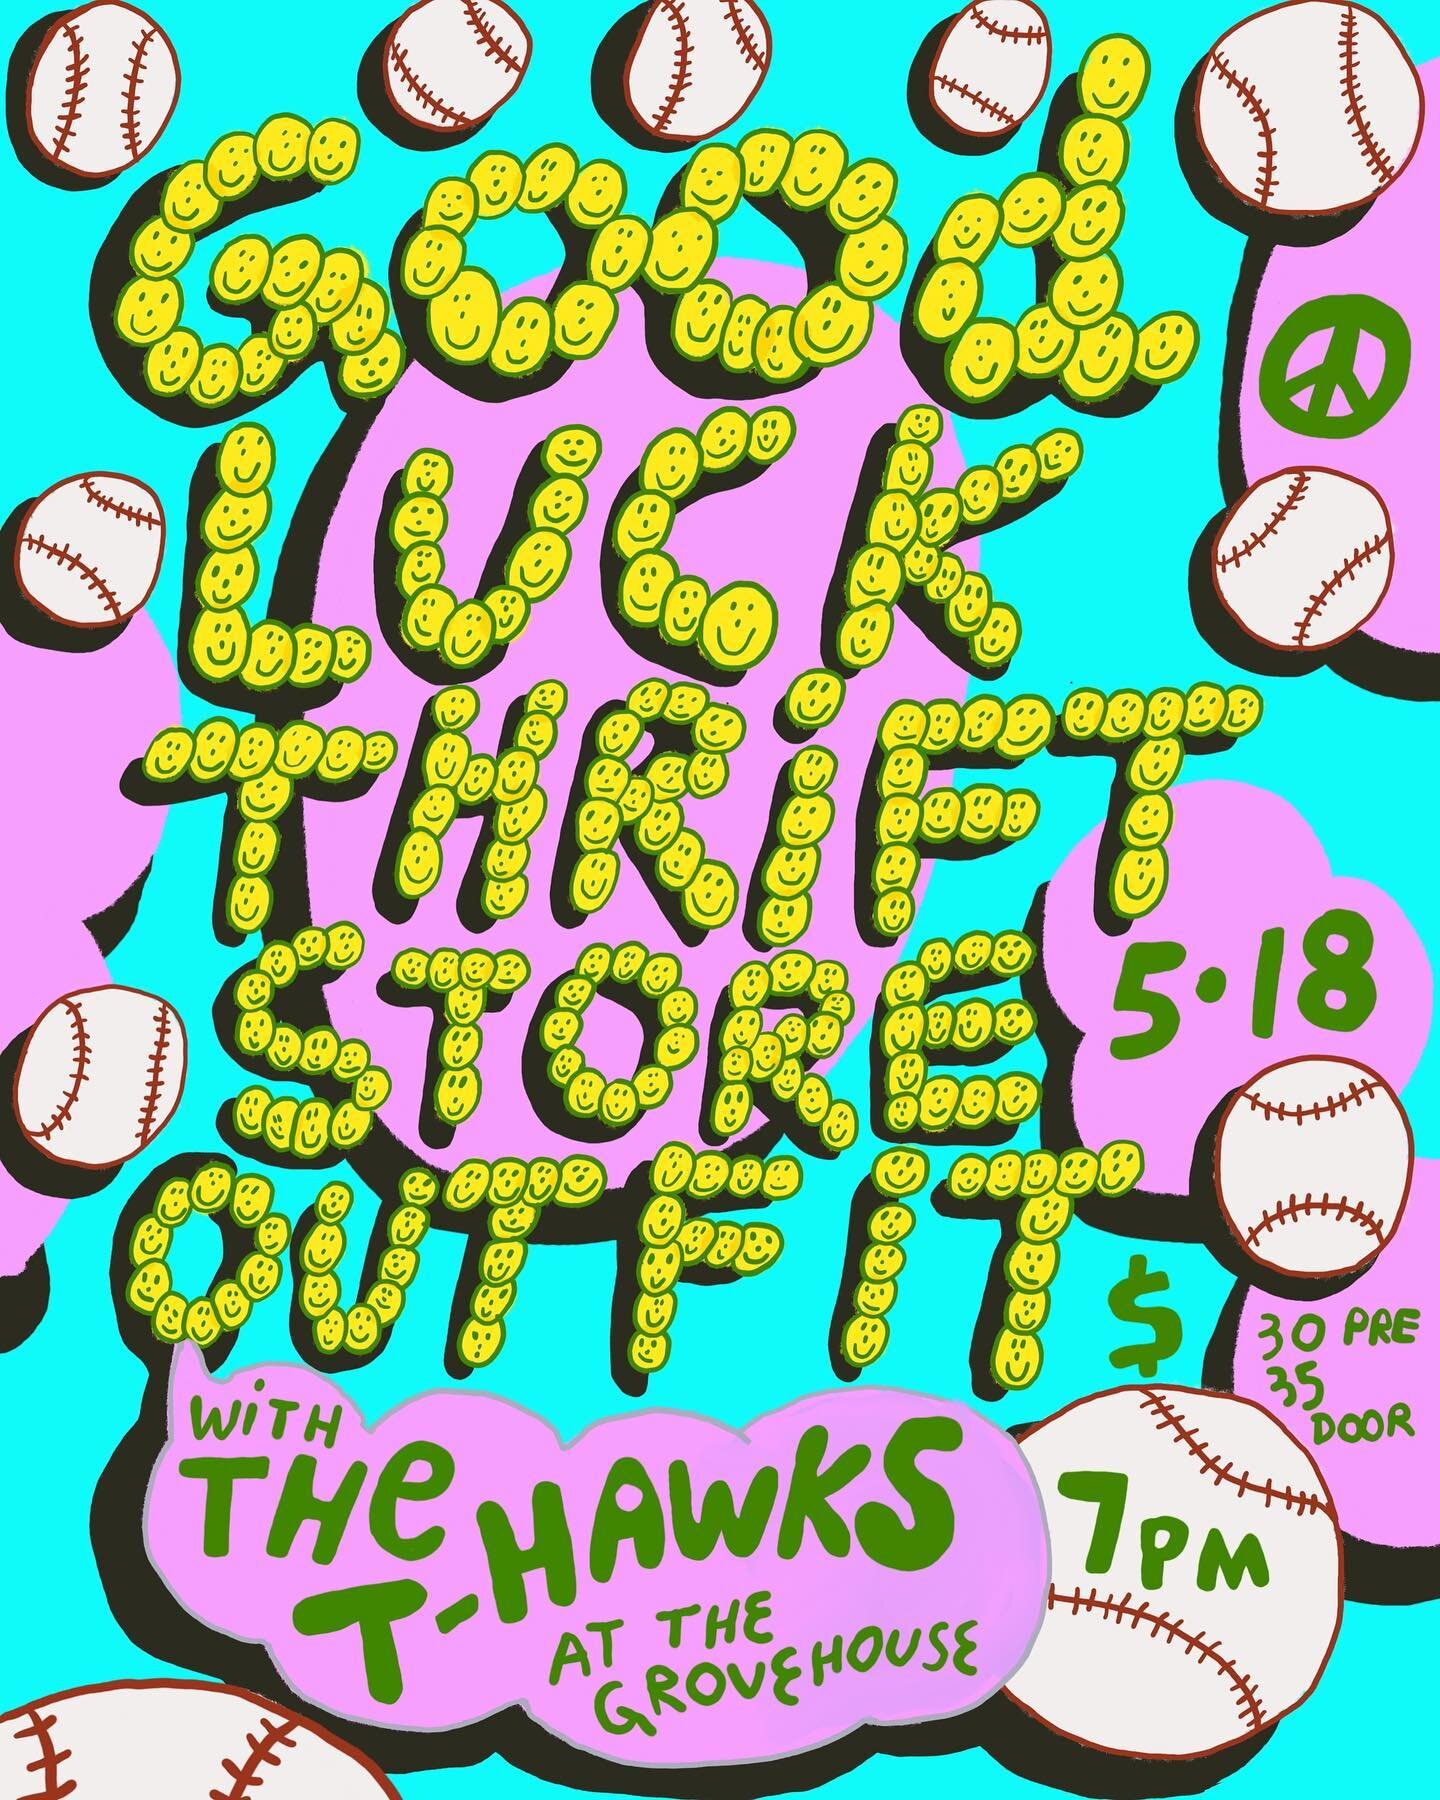 We have two epic shows this week both start at 7 pm. 

Thursday 5/18: legendary band @tgltso is playing with the T-hawks. There are still some tickets available but not many. Get them on eventbrite. This is going to be one of the best nights of the w